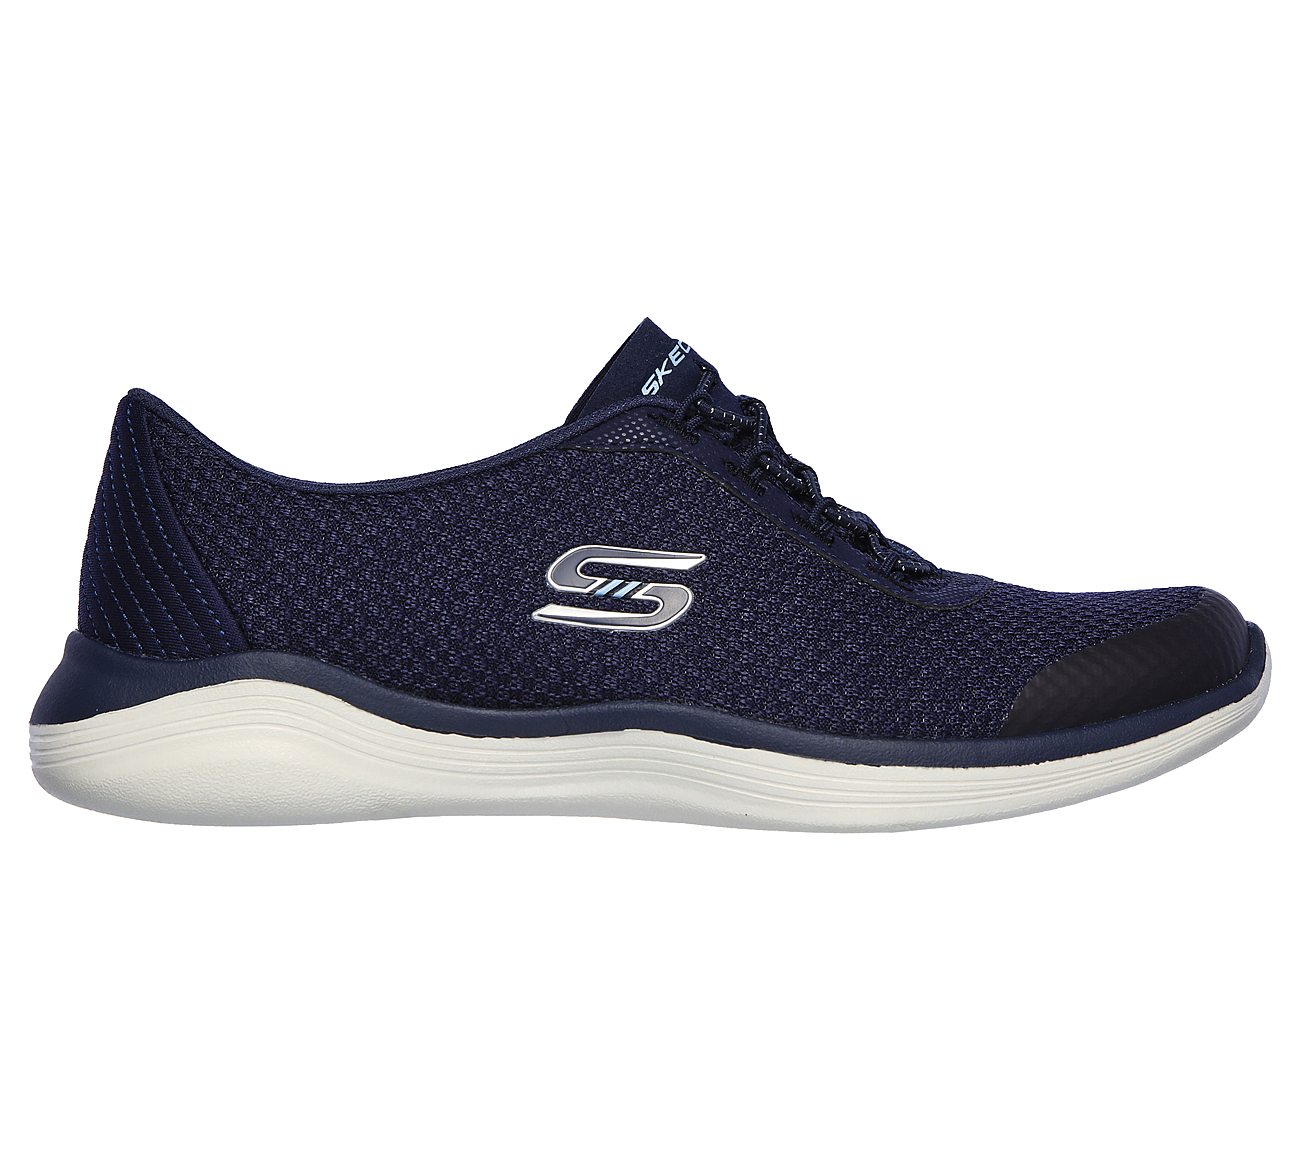 SKECHERS Envy - Good Thinking Bungee 